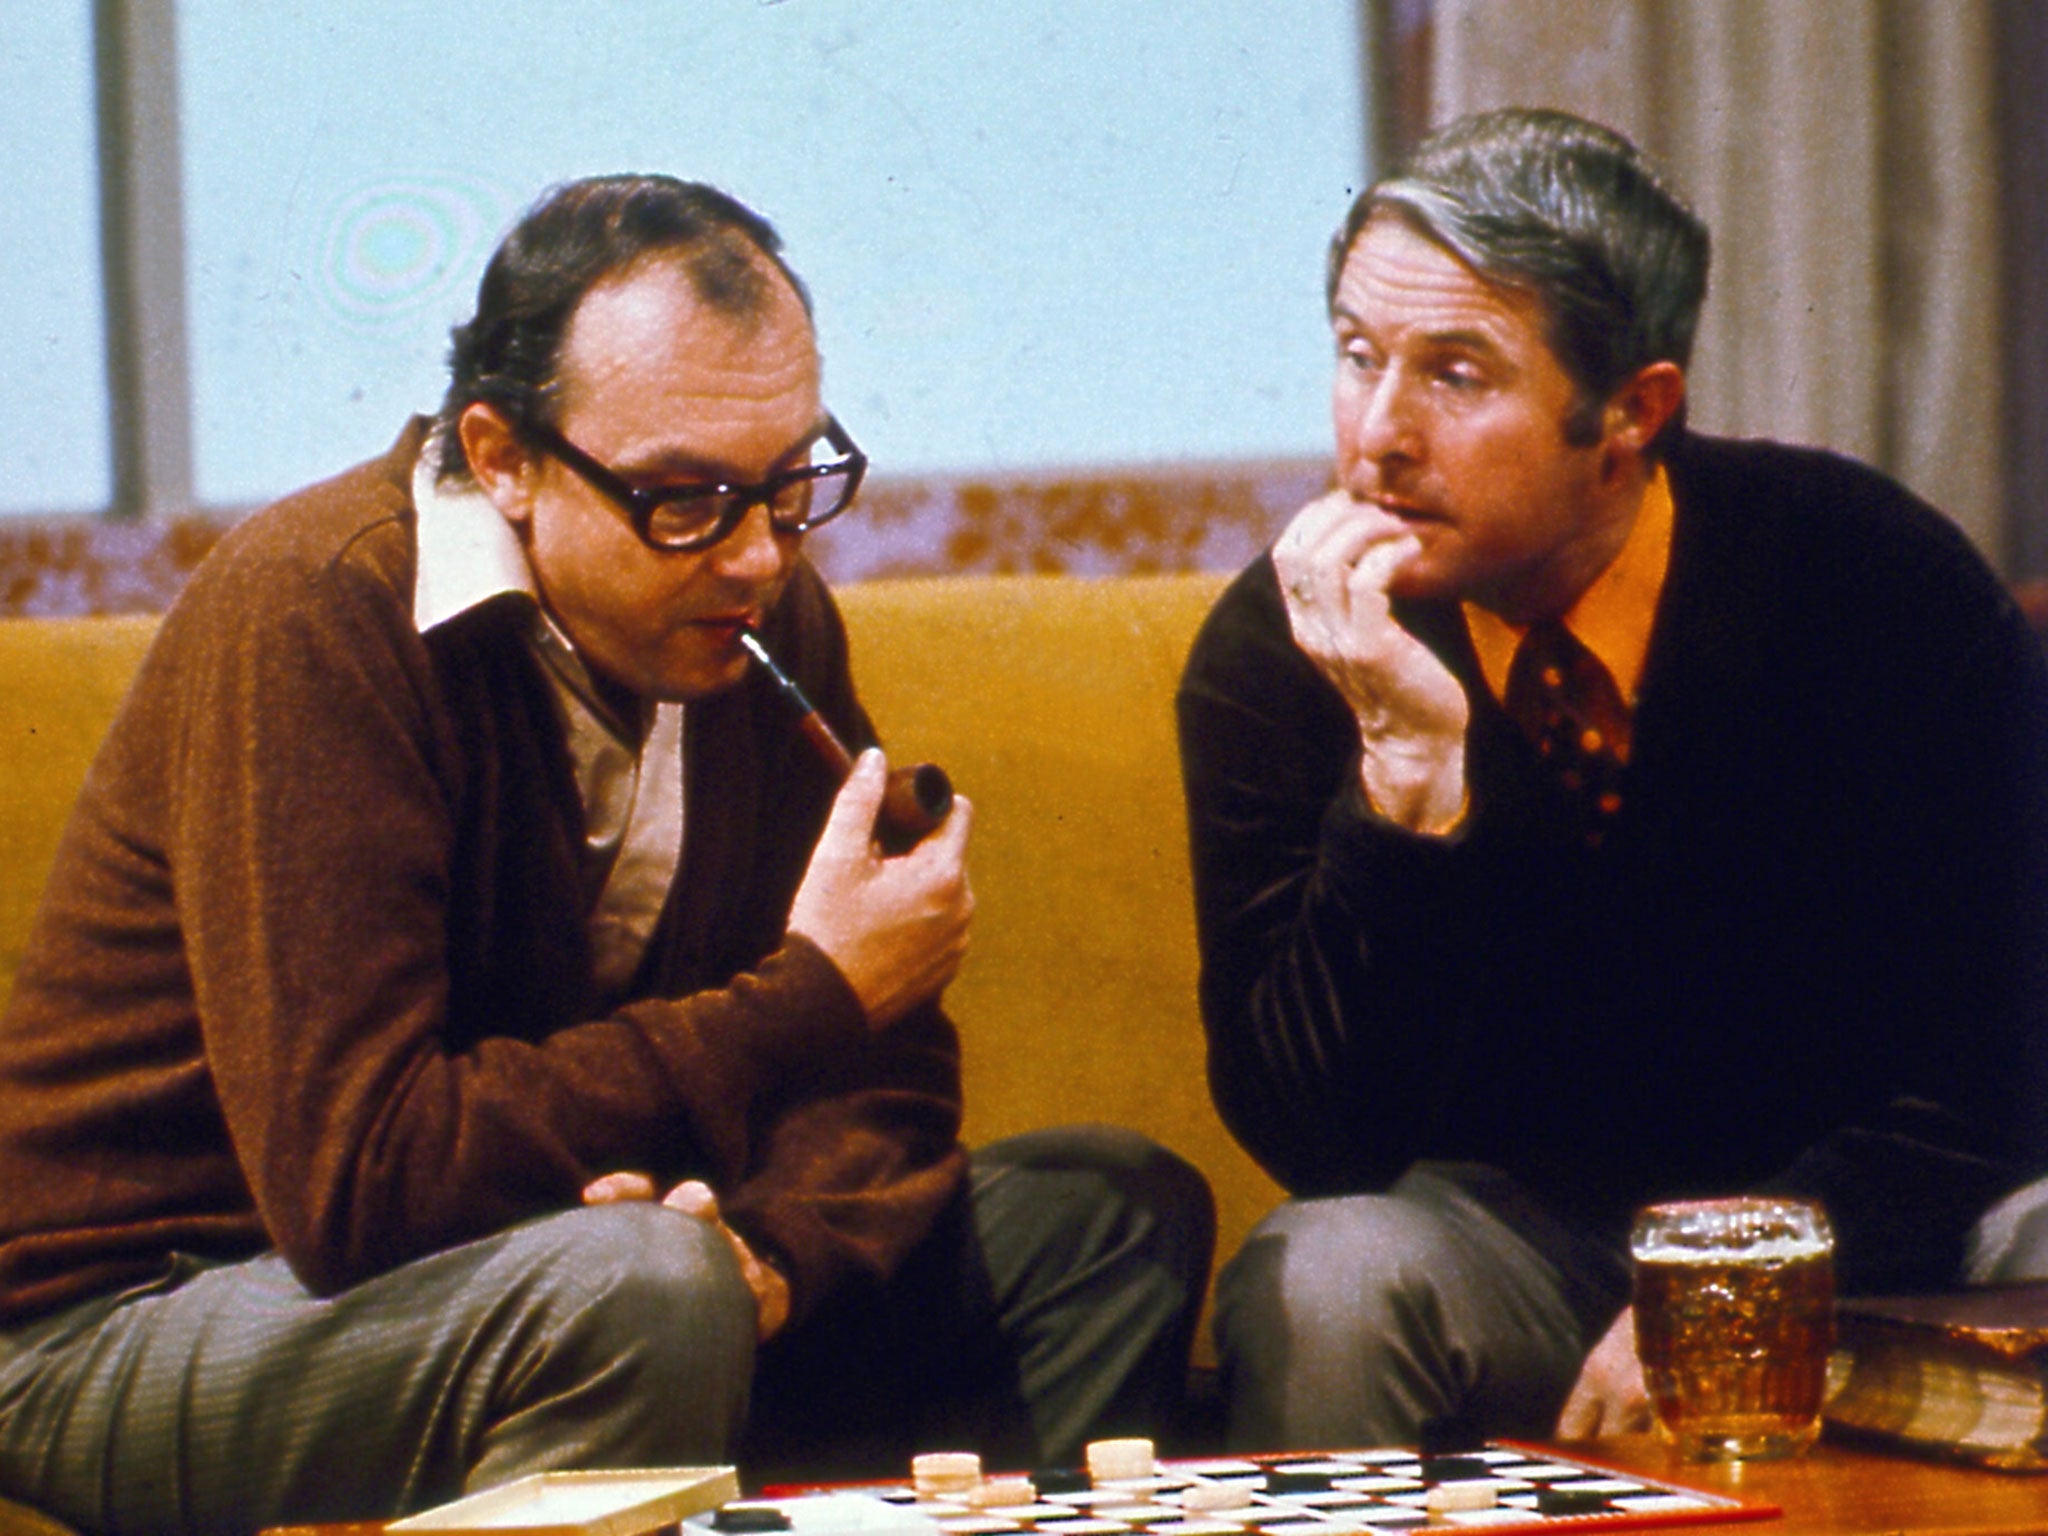 Morecambe and Wise on their television show in January 1973